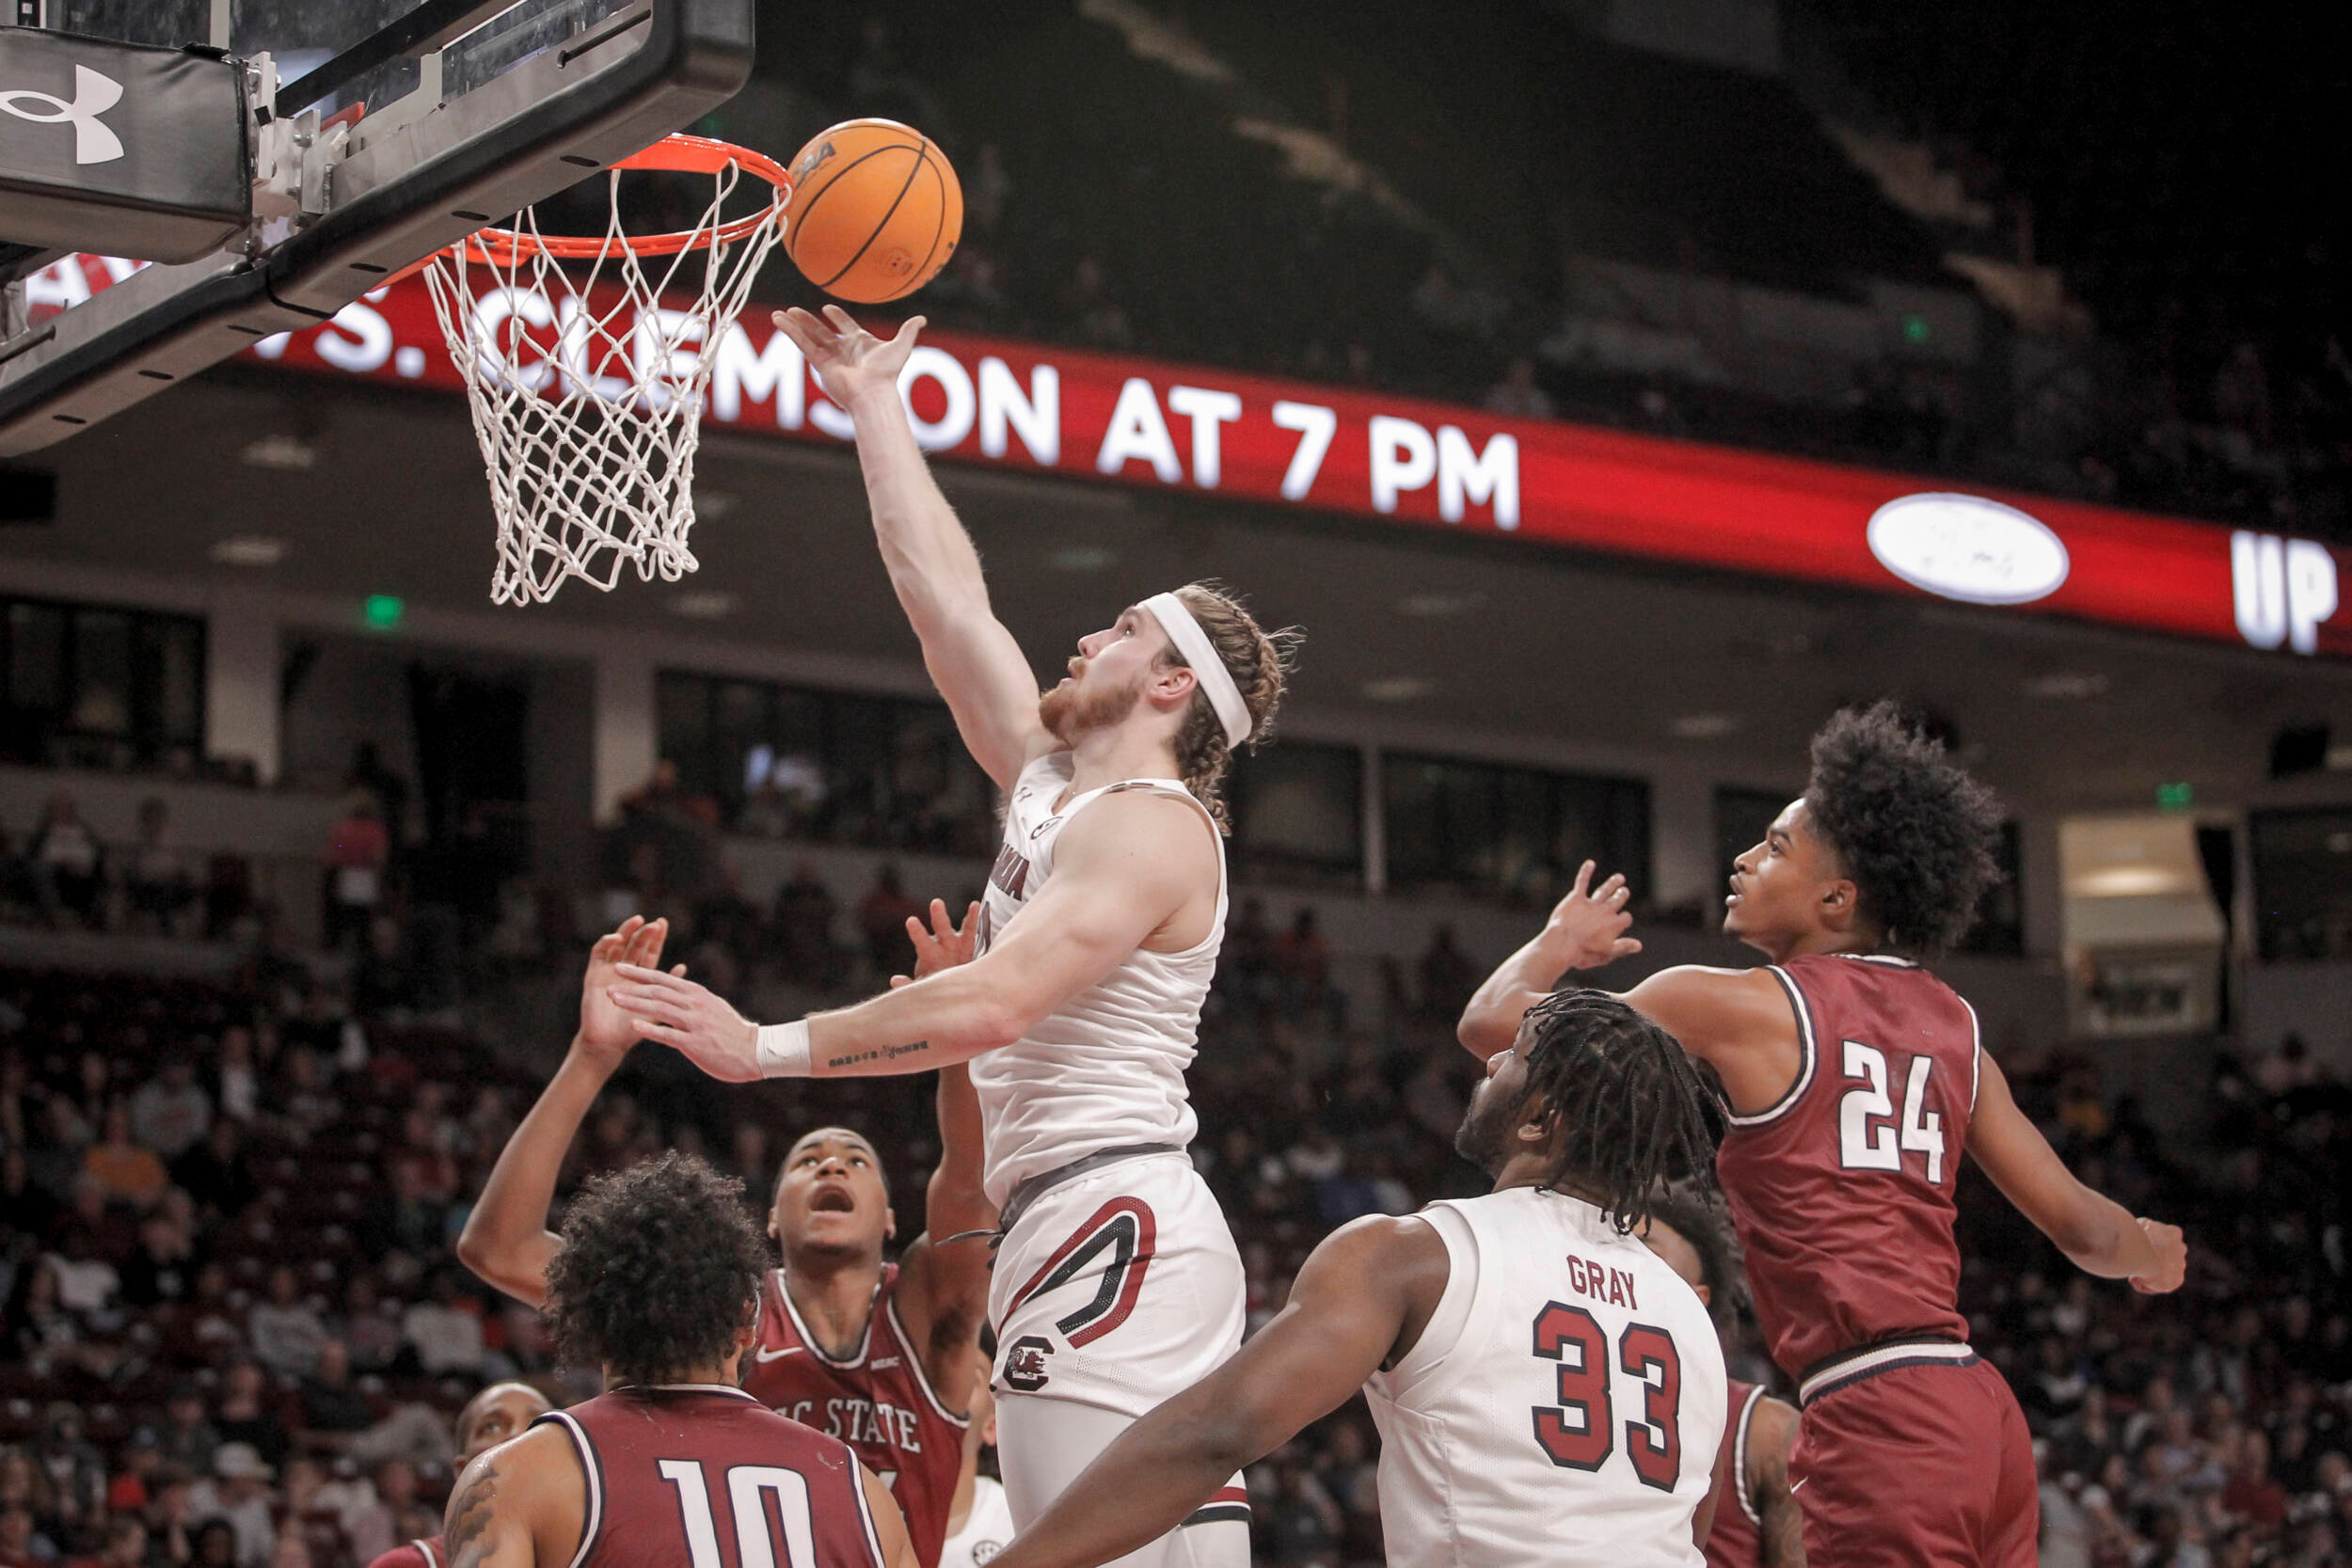 Gamecocks Welcome Tigers to CLA Friday Night